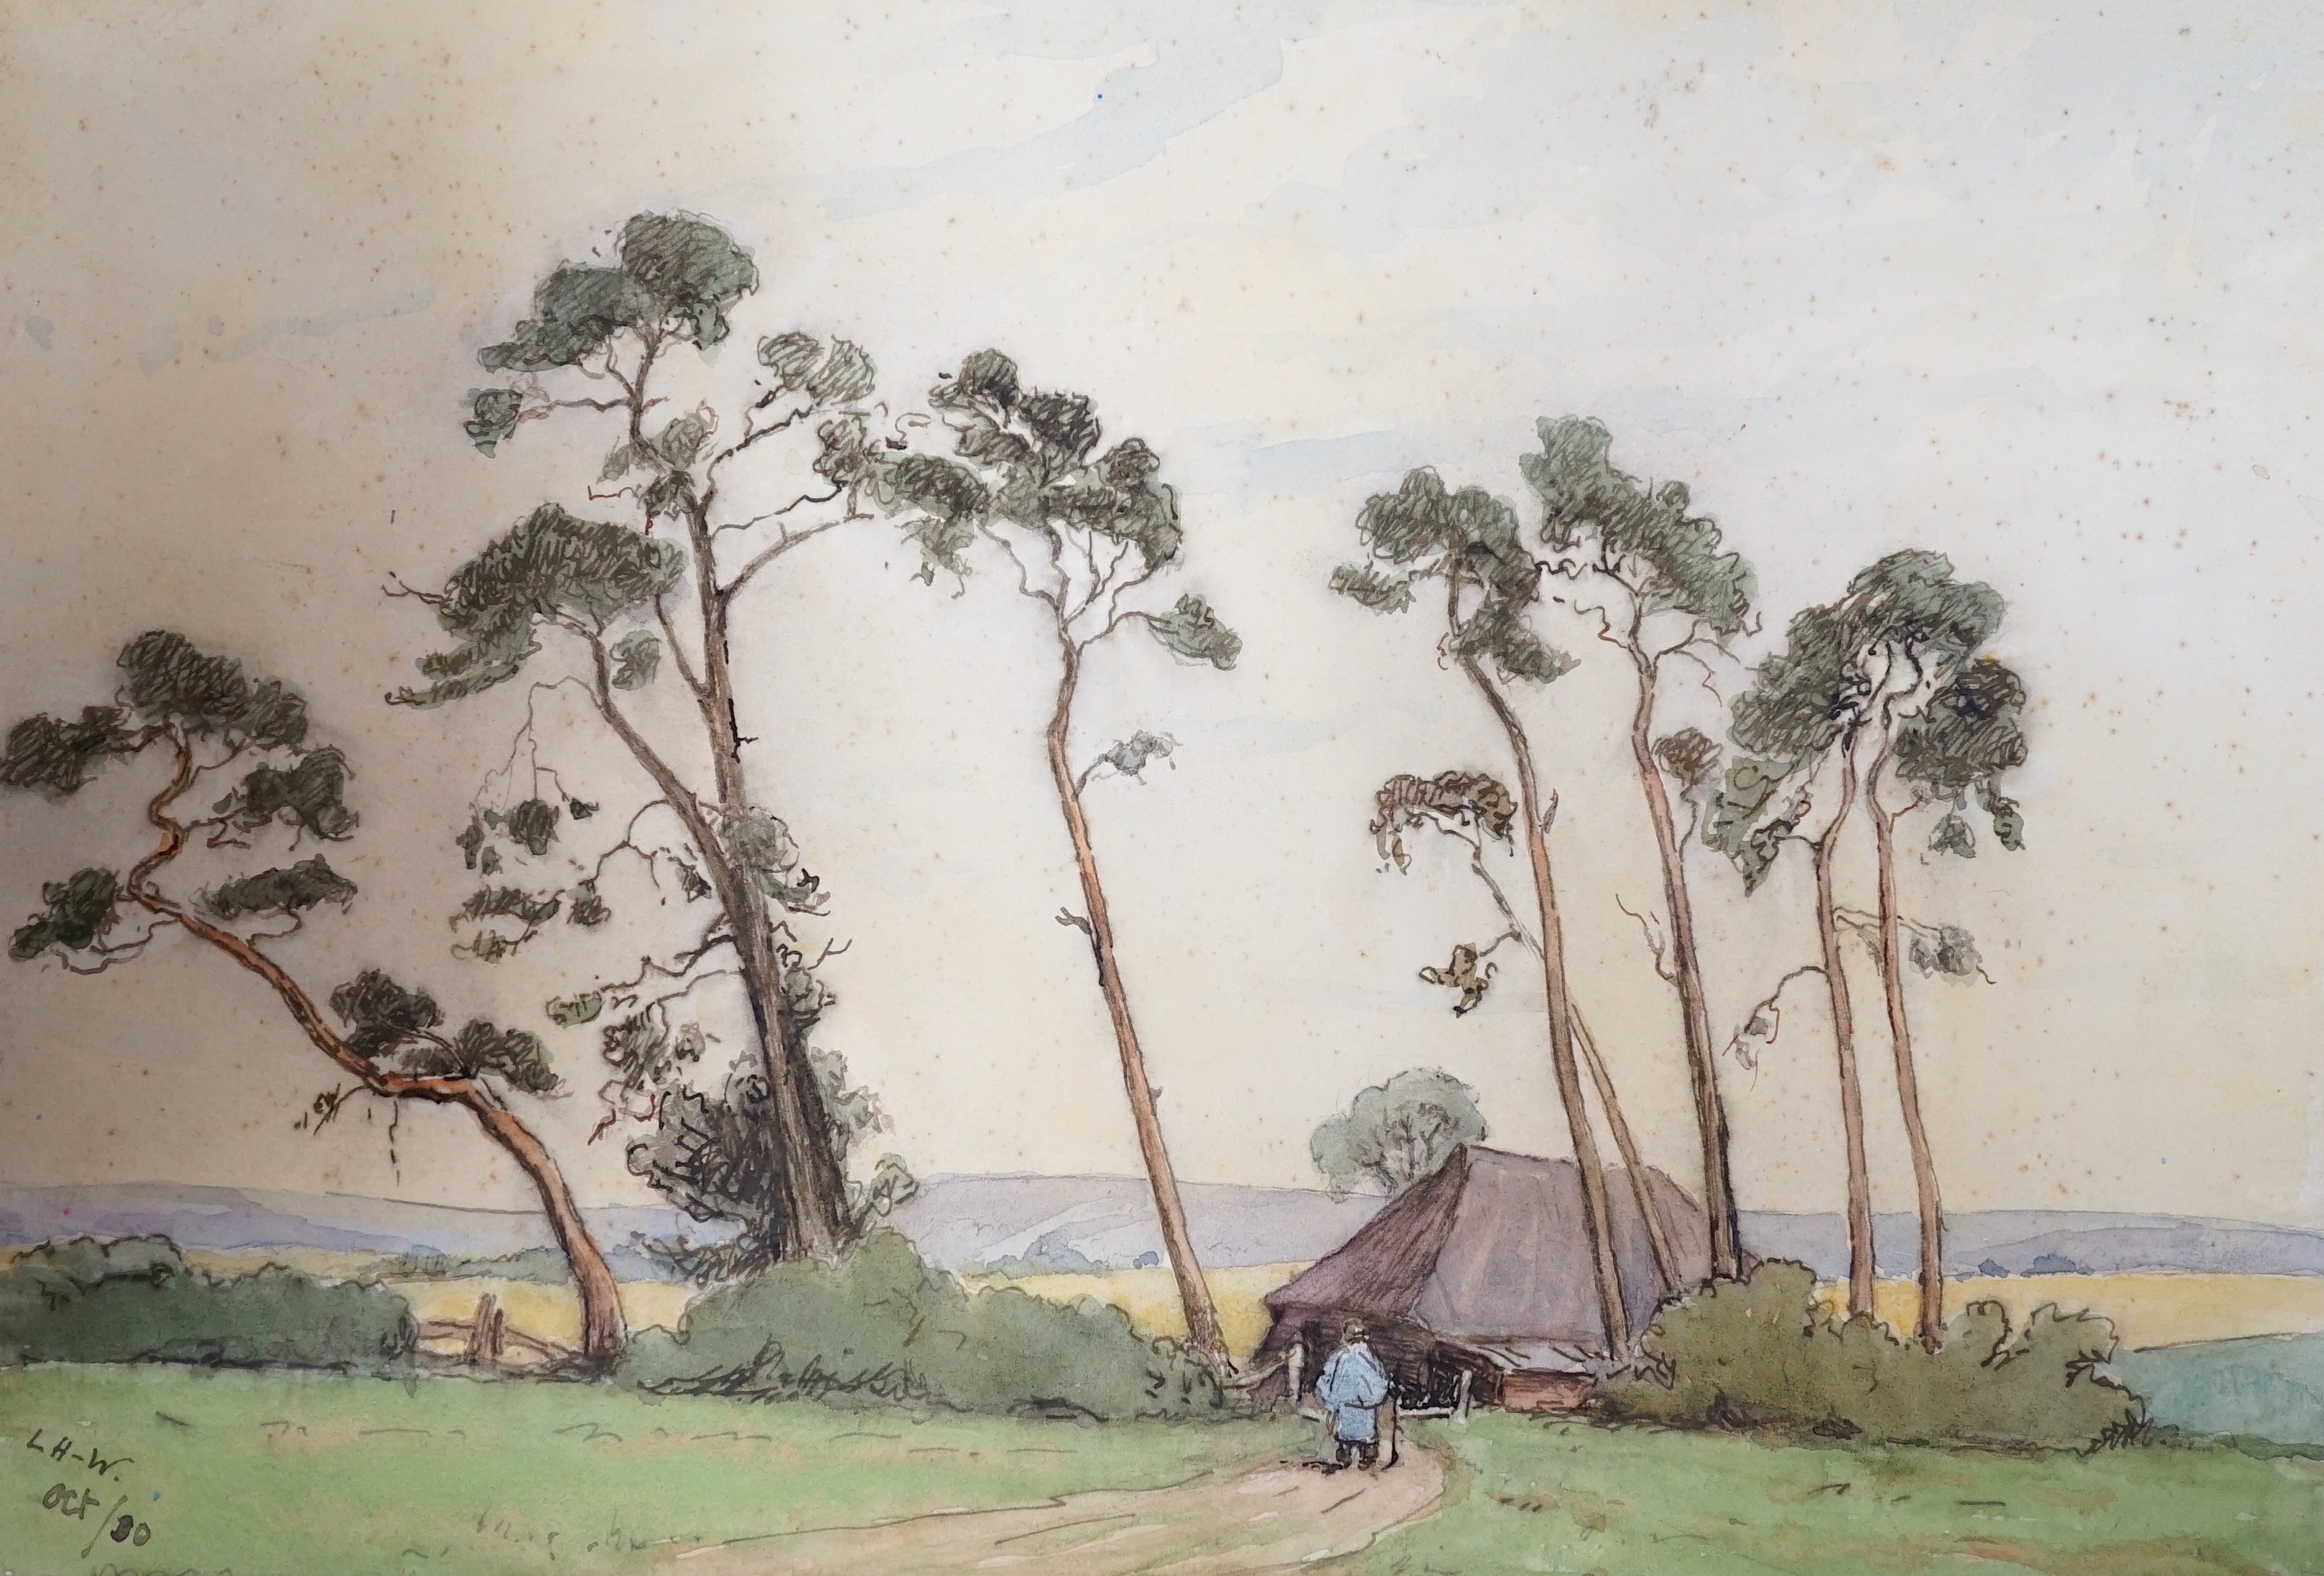 William Rainey (1852-1936) and Lady Lucy Hume-Williams (1862-1948) and Sophie D'Ouseley Meredith (1851-1932), three watercolours, 'East Dean Church', 'Windswept fir trees' and 'The Bluebell Wood', all original artworks f